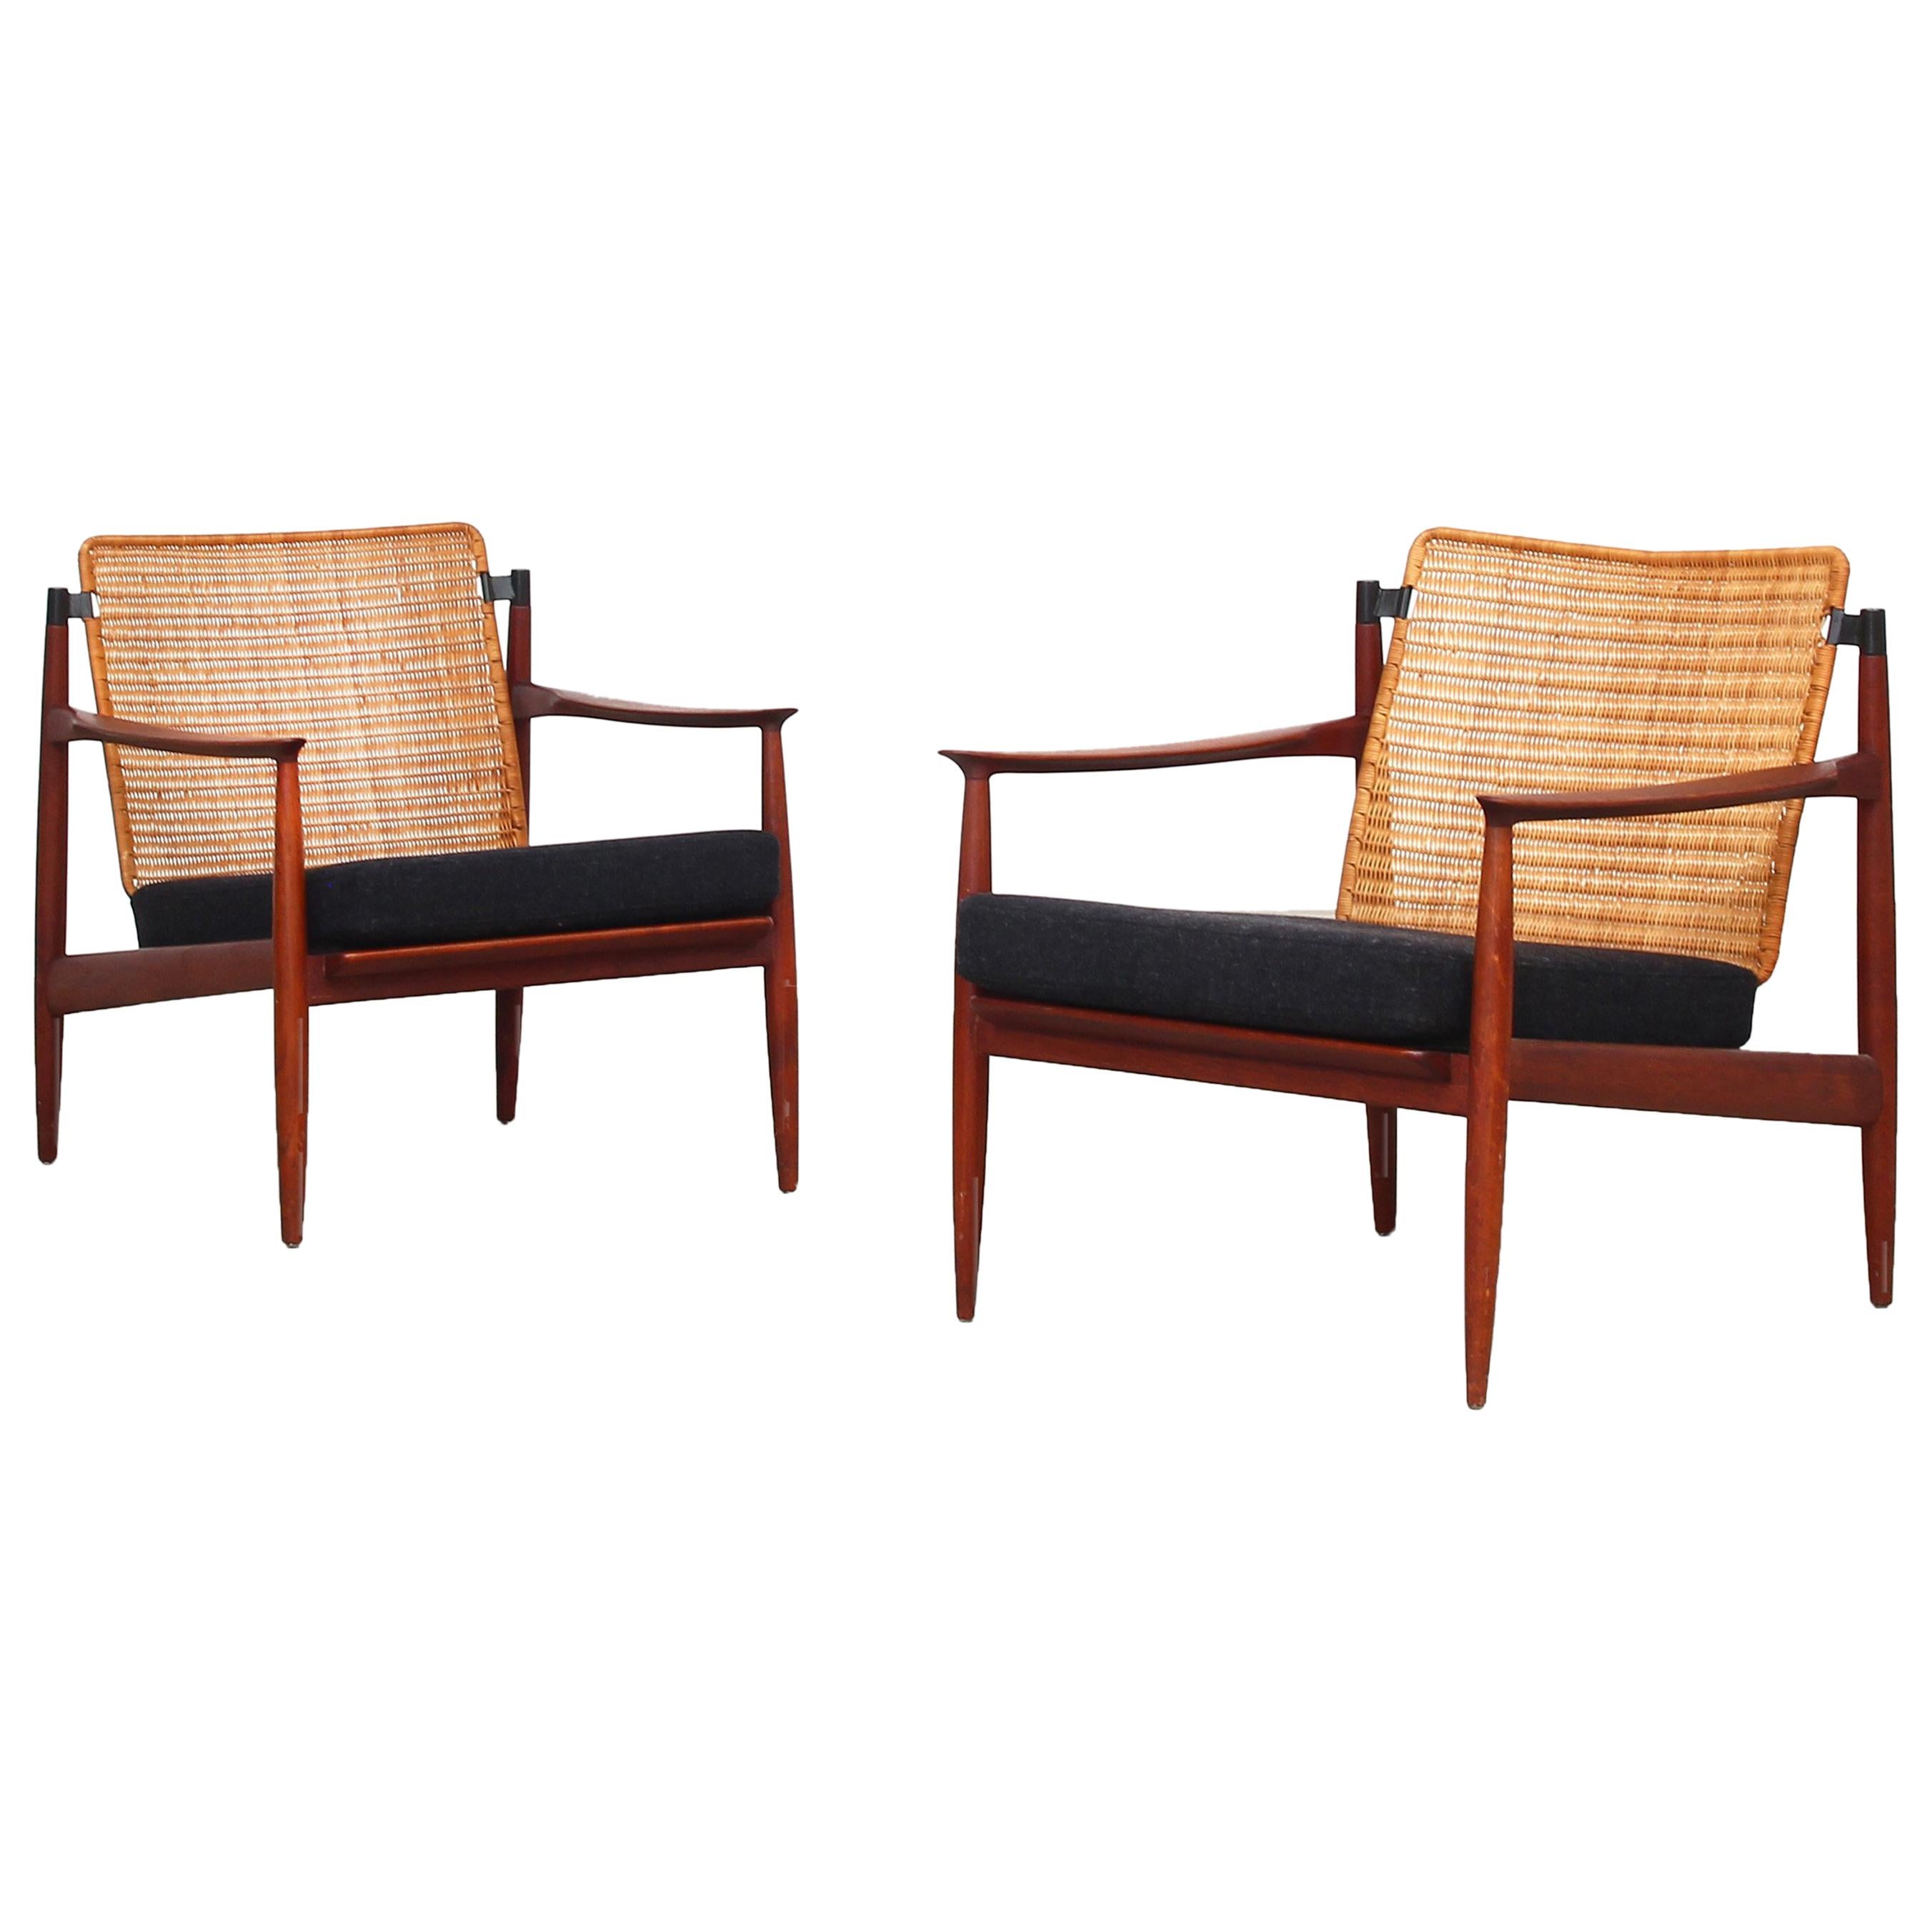 Pair of Lounge Chairs by Carl Straub for Goldfeder Germany 1950s